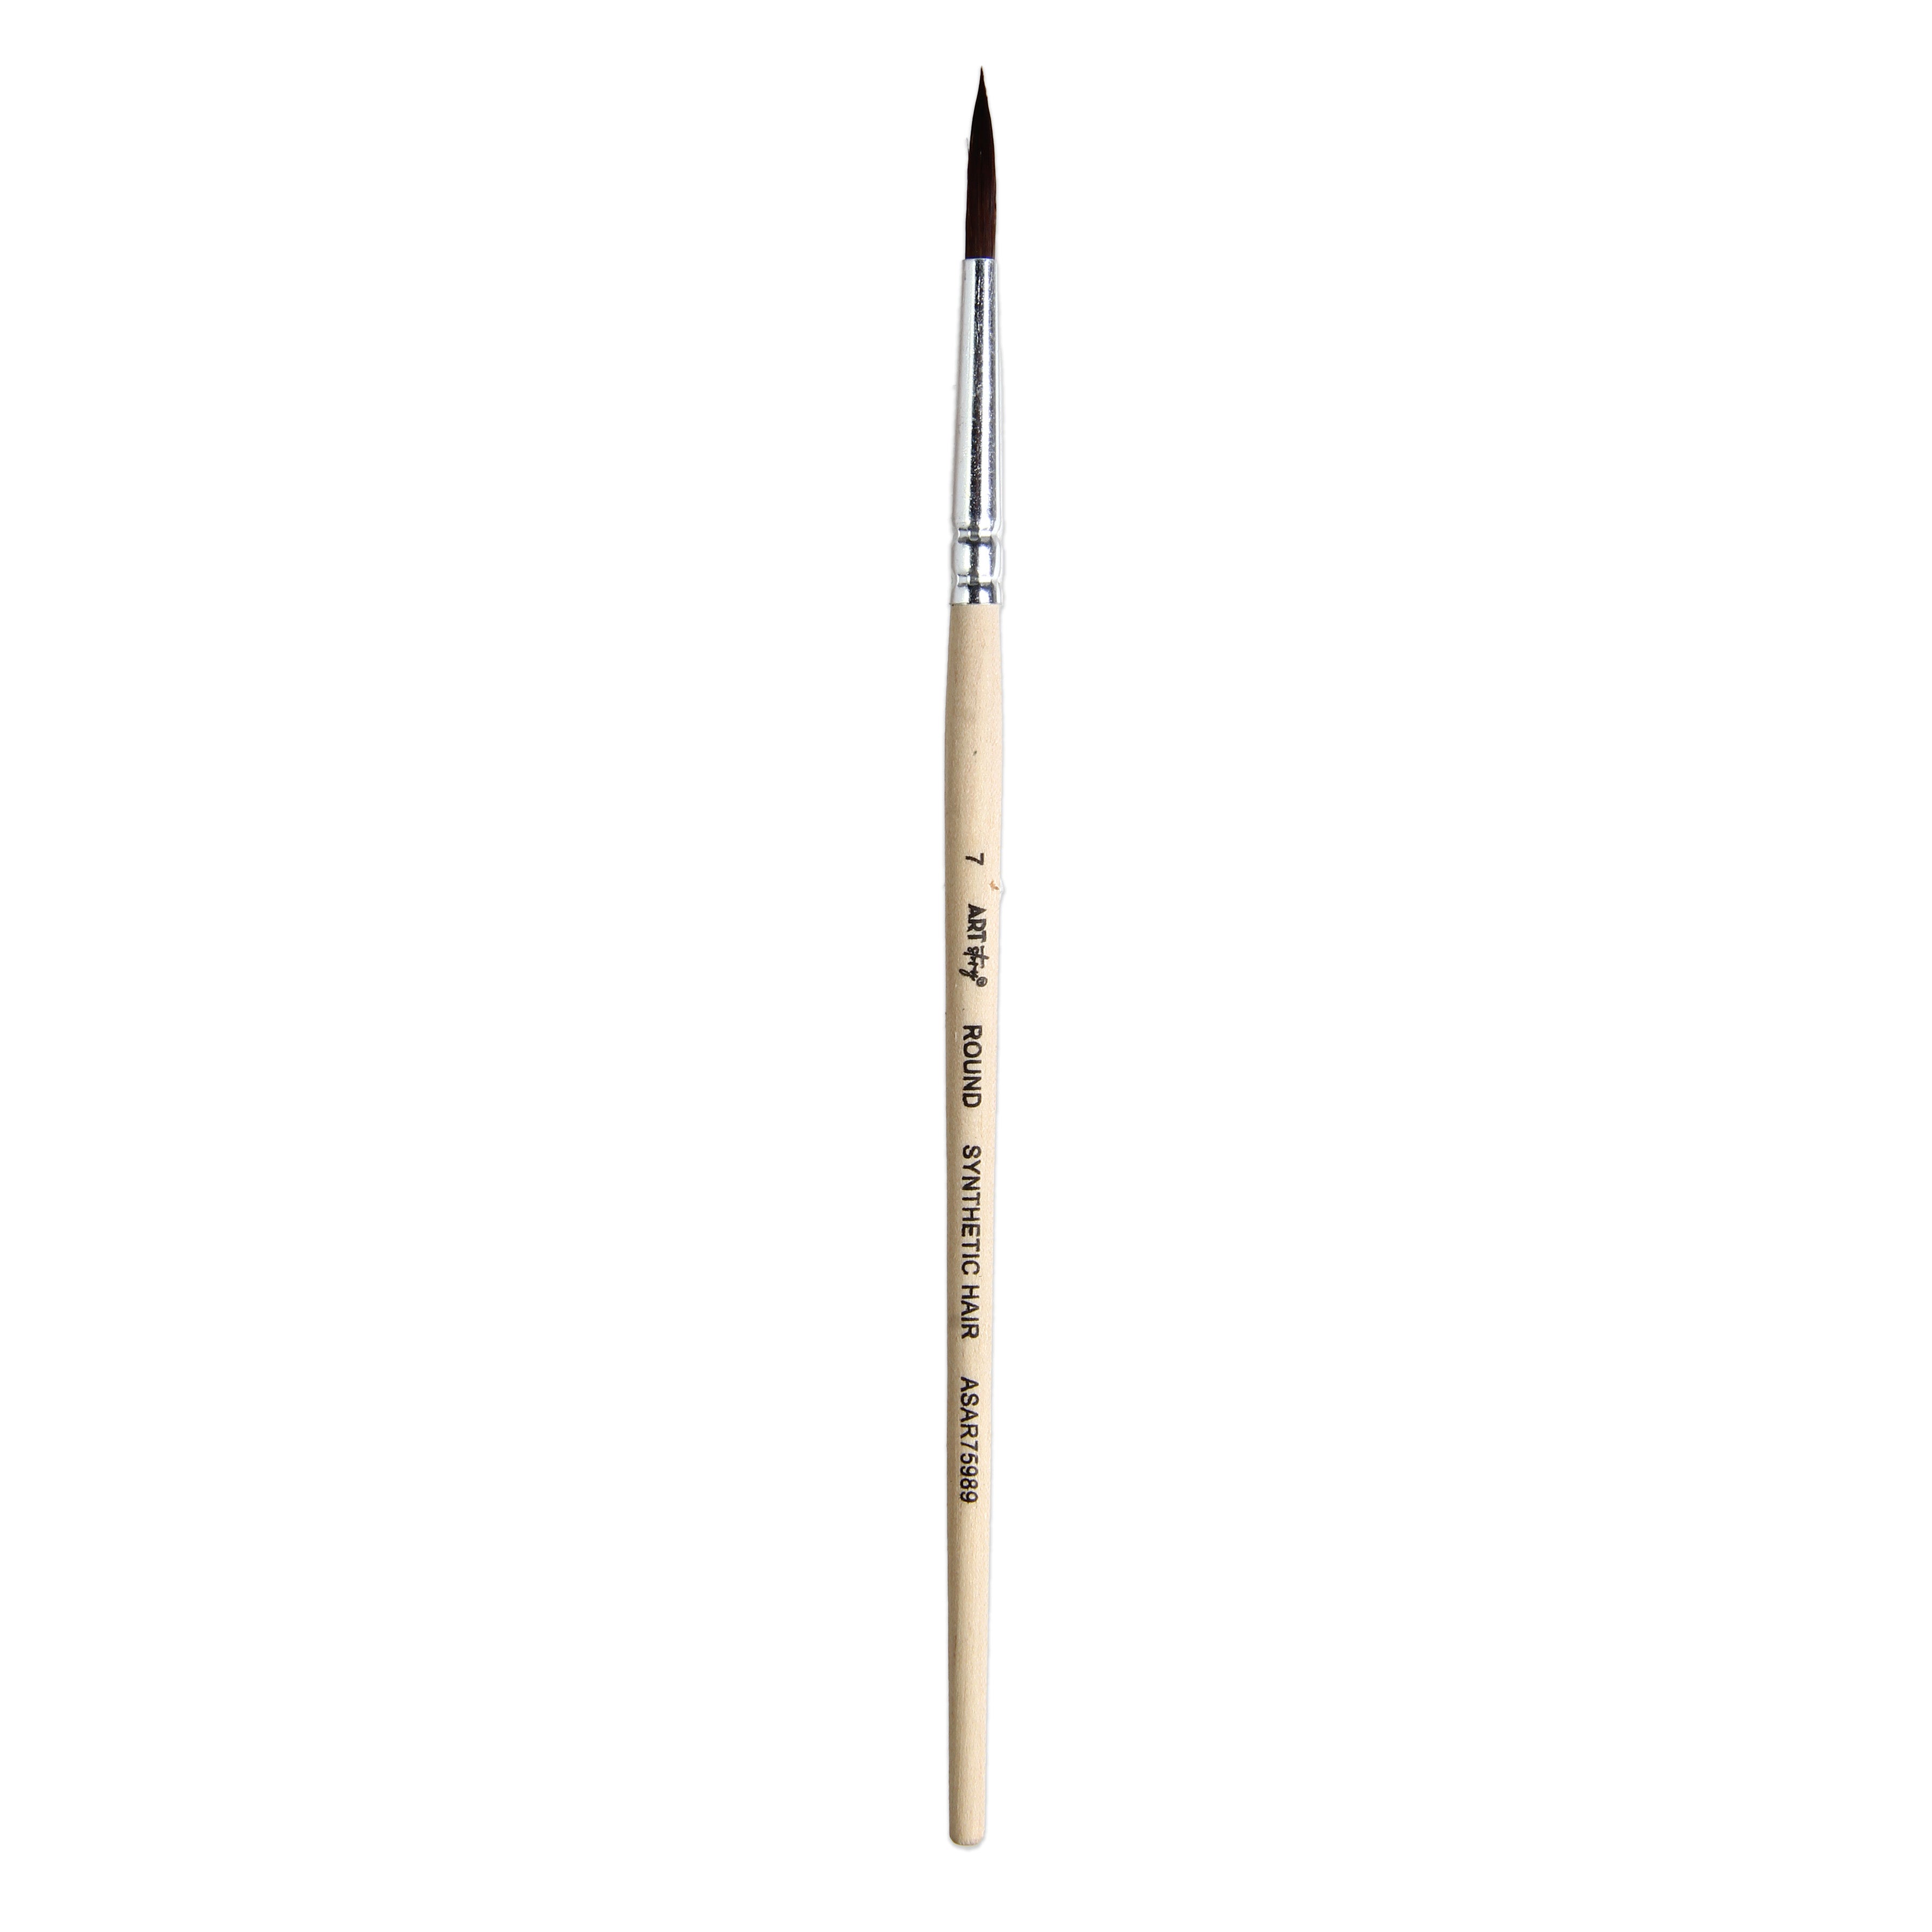 Watercolour Round Brush Synthetic (7) 165mm